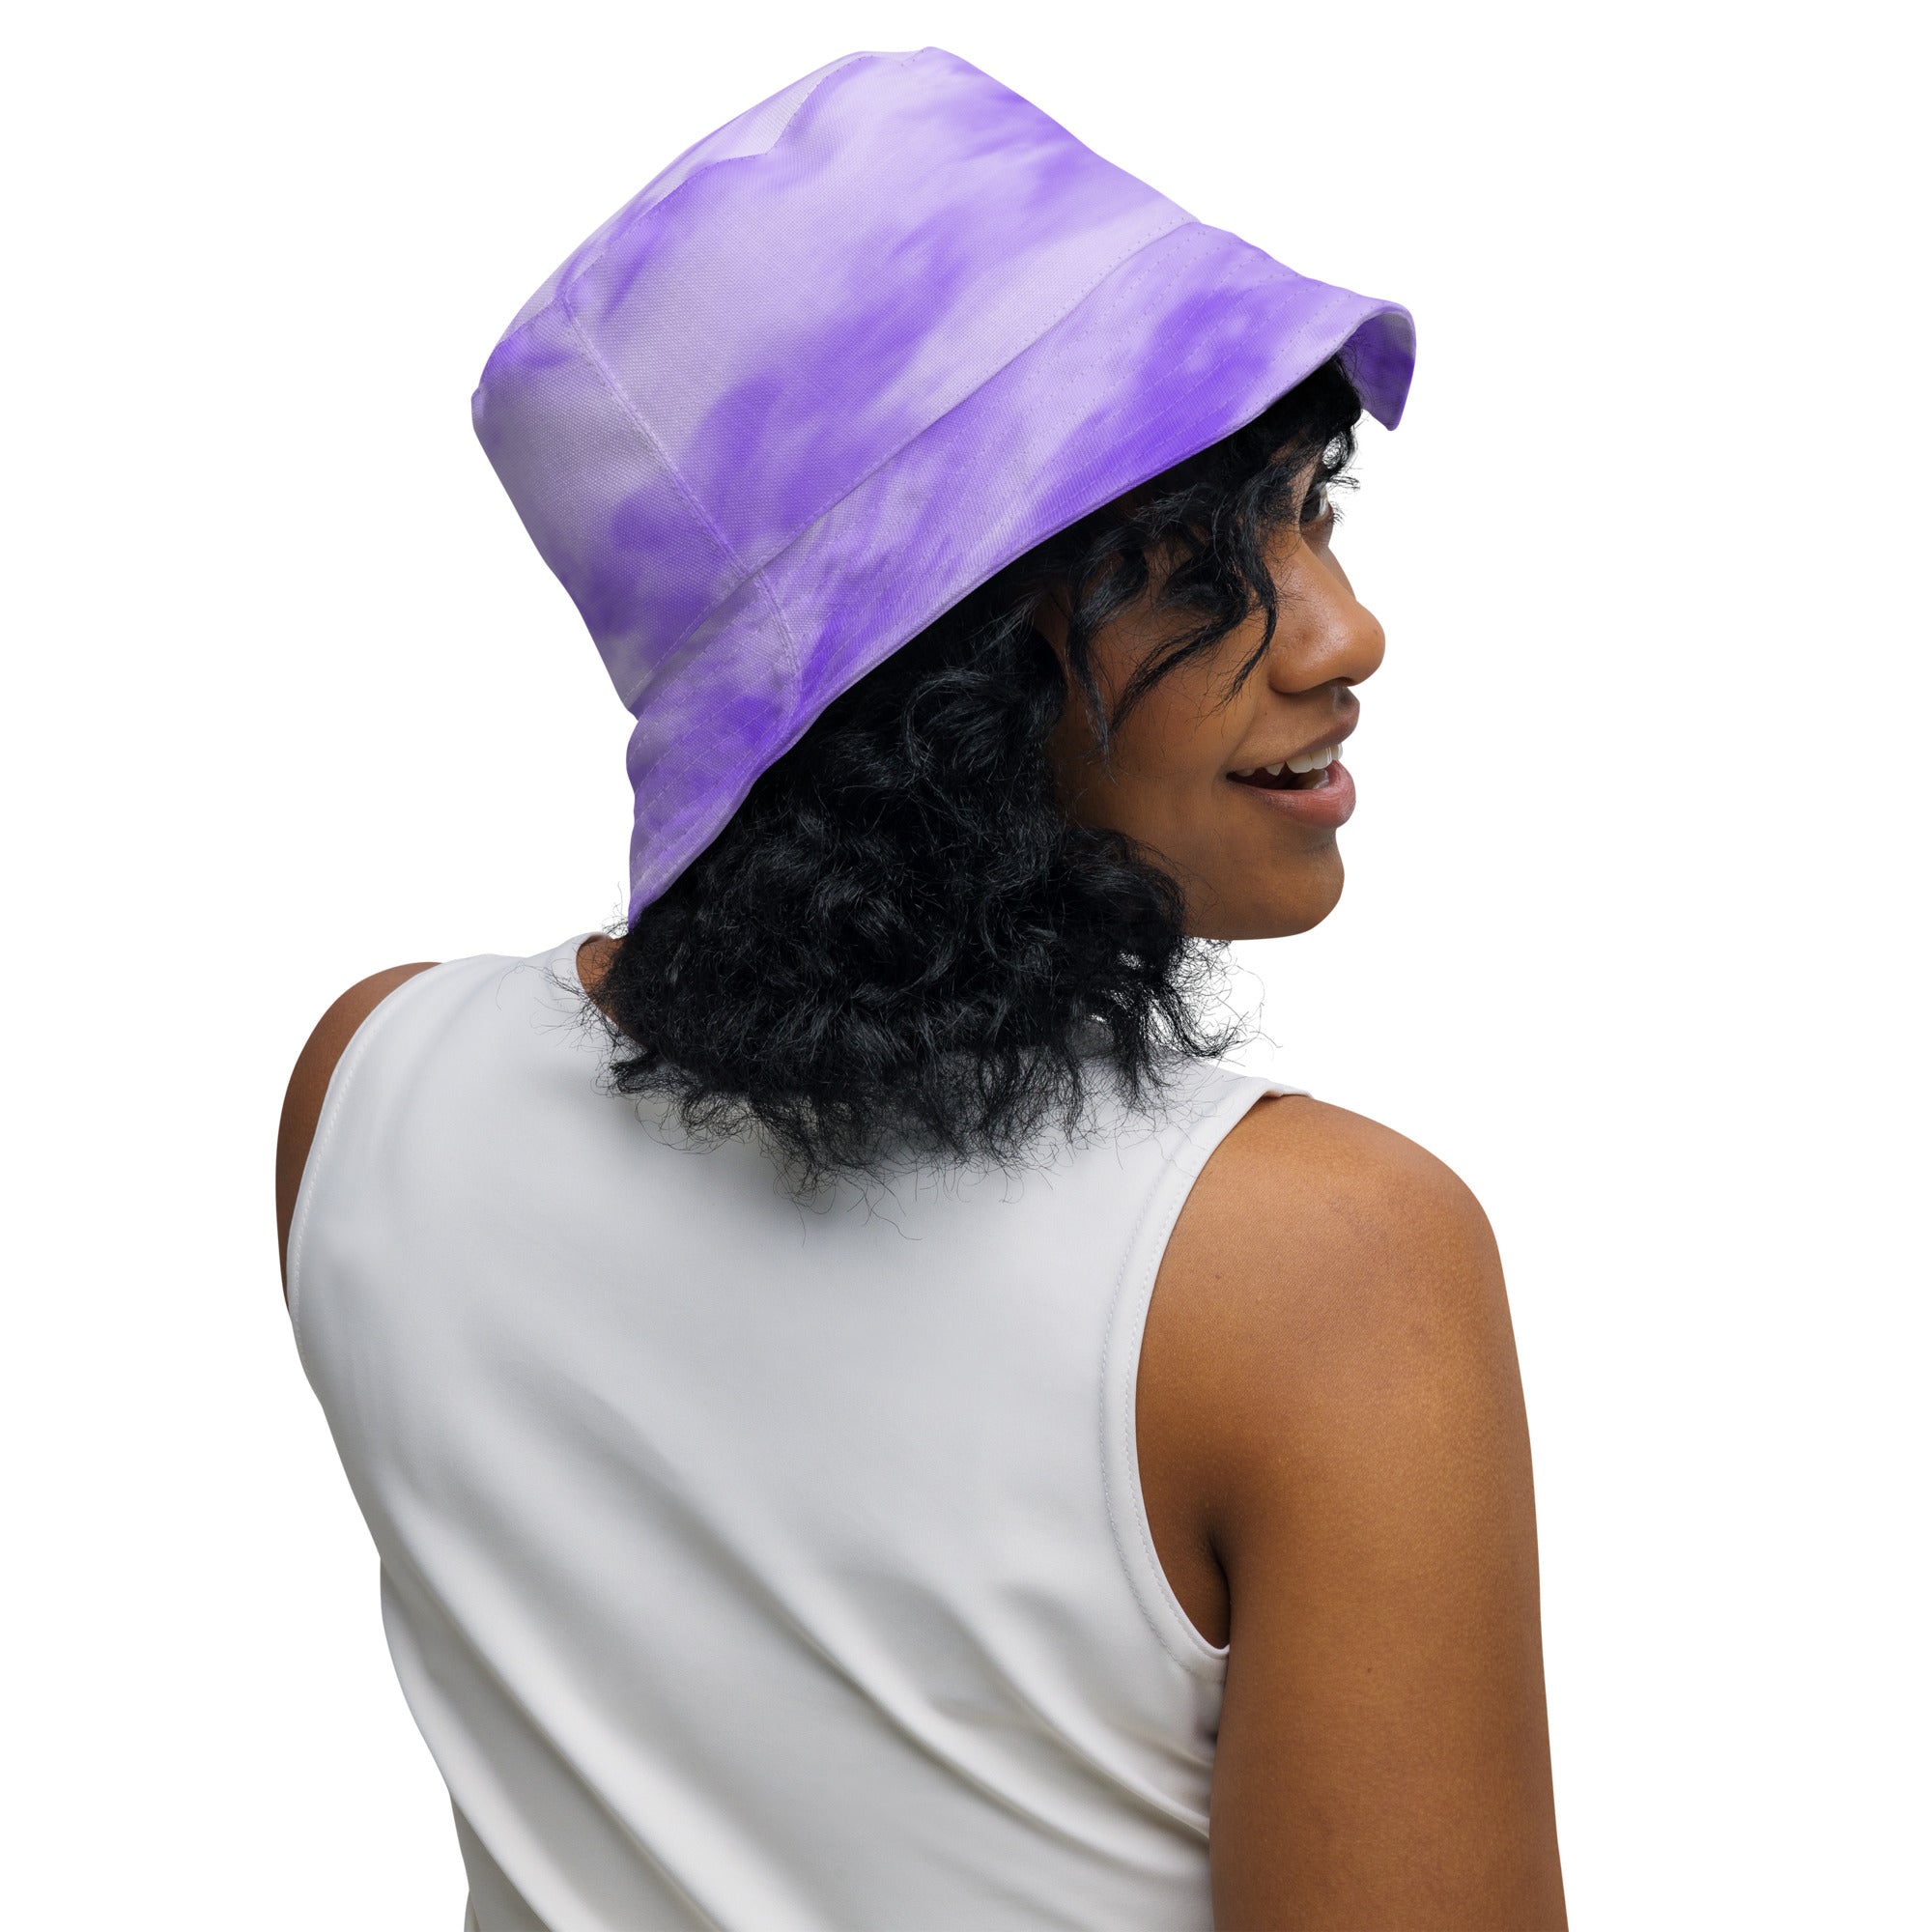 "Purple Haze: Dive into Tie-Dye Chic with Our Bucket Hat", lioness-love